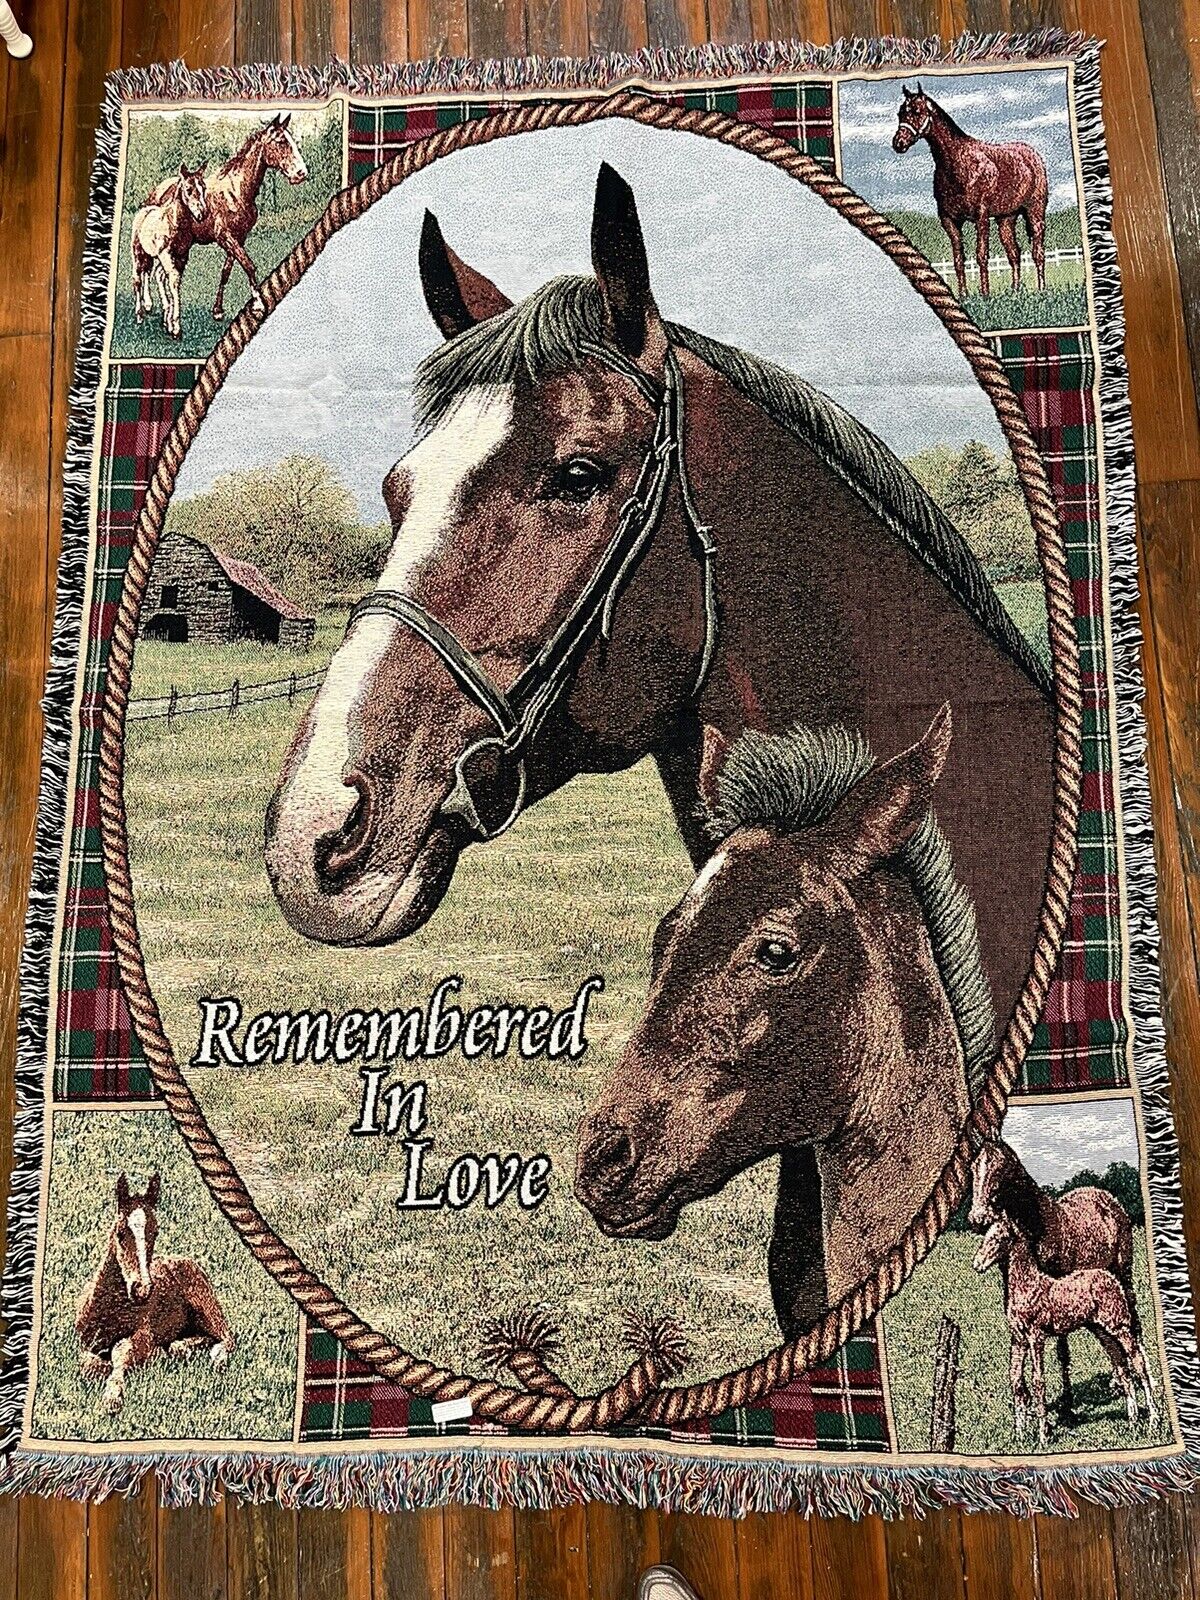 Horse & Colt Remembered In Love Cotton Farm Barn Woven Afghan Throw Blanket Nos